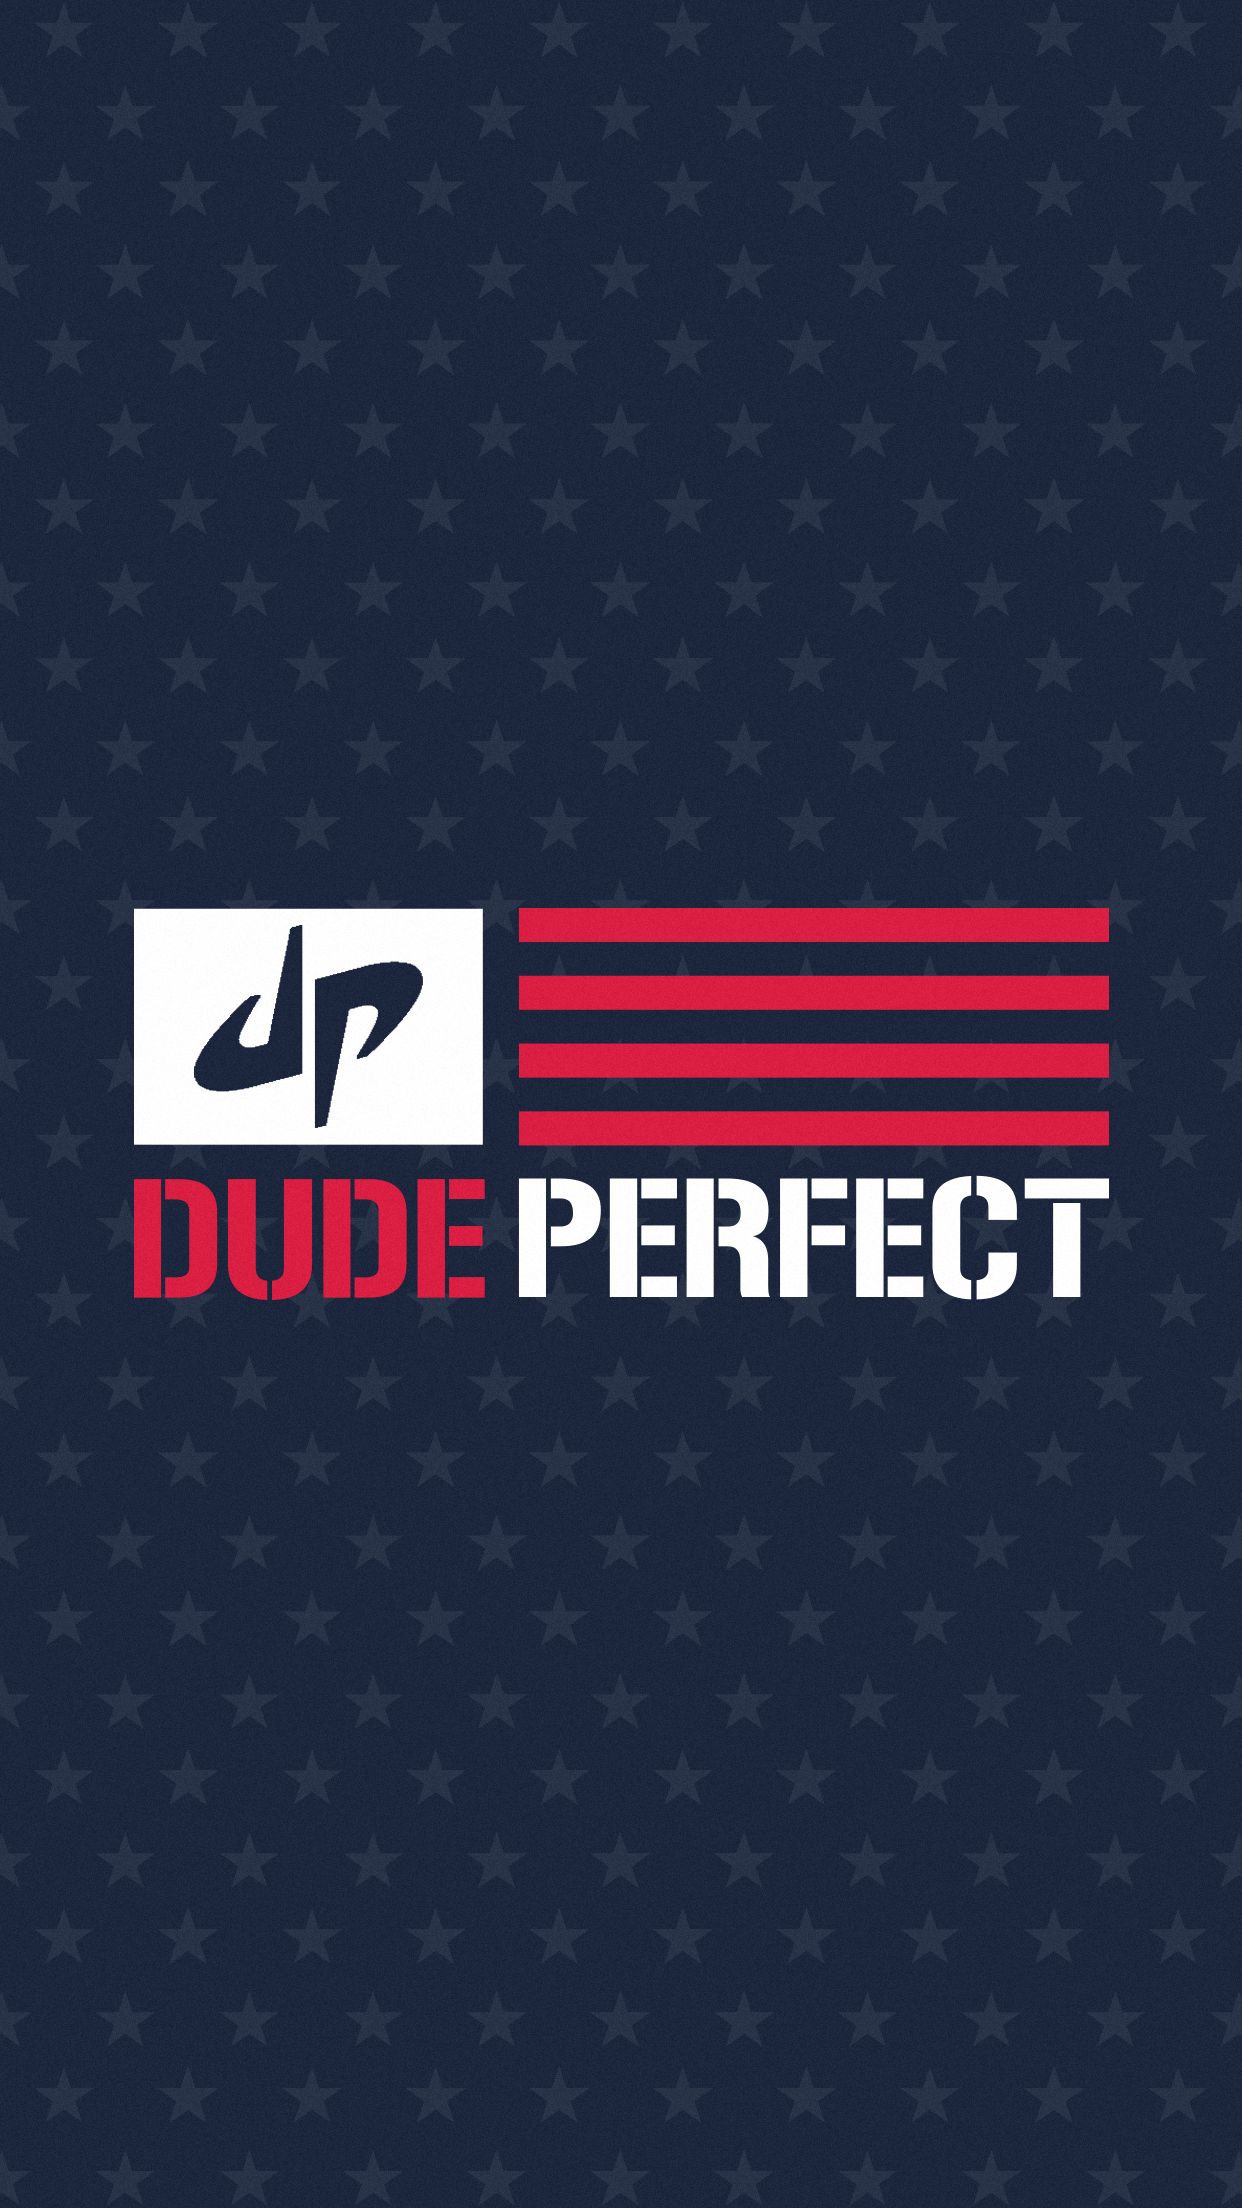 Dude Perfect Gaming wallpaper by HMB6000  Download on ZEDGE  1494